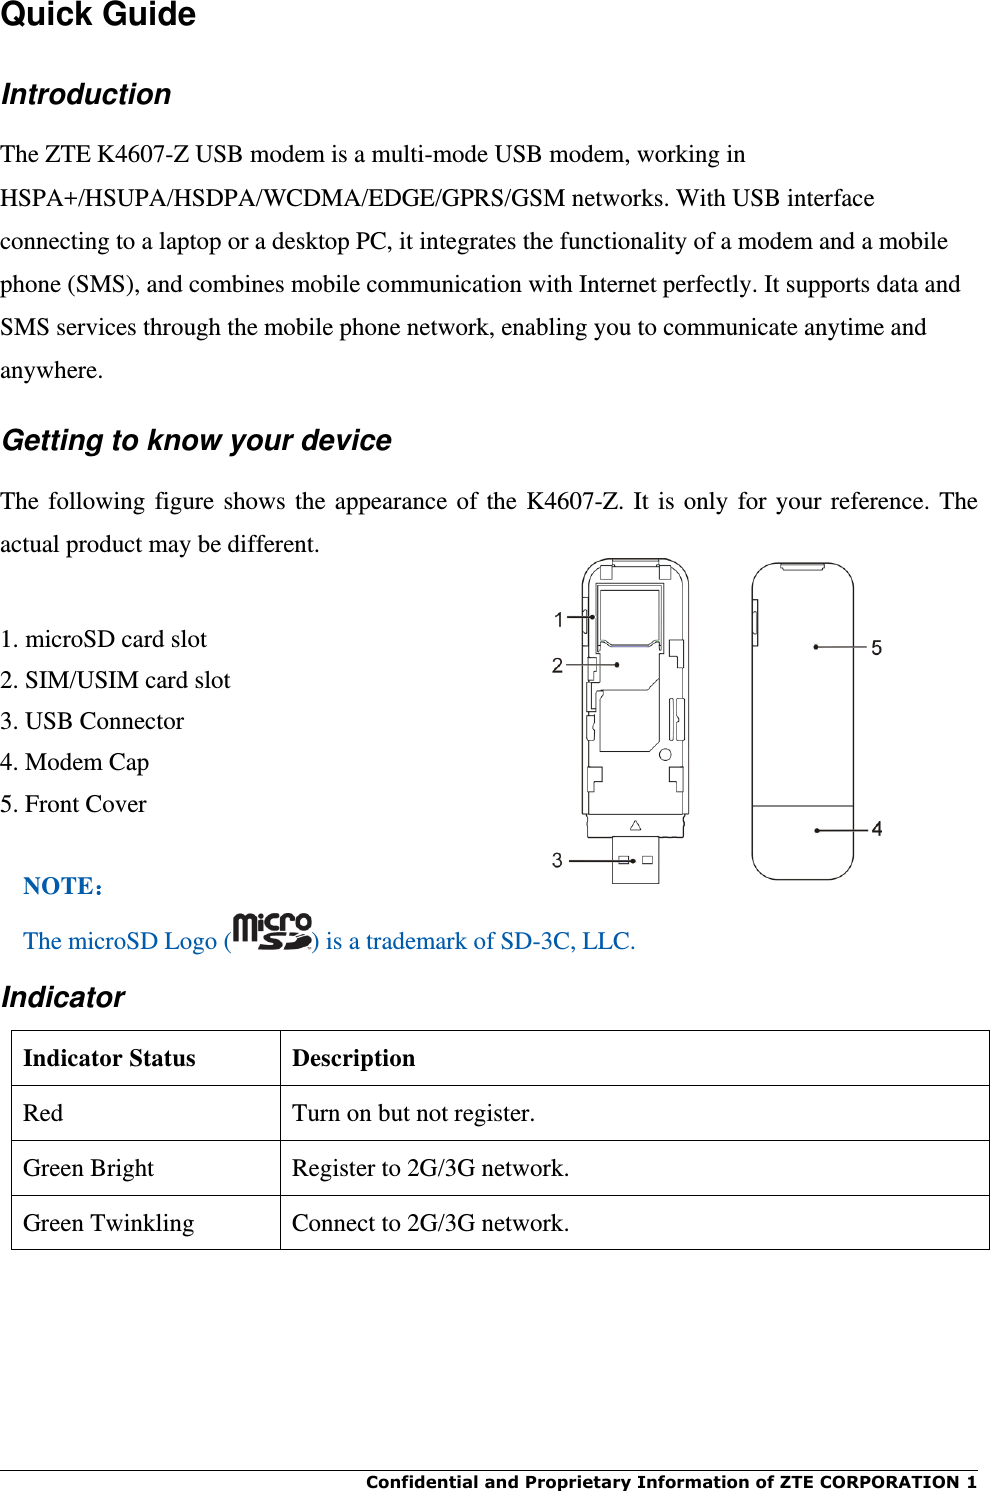  Confidential and Proprietary Information of ZTE CORPORATION 1    Quick Guide Introduction The ZTE K4607-Z USB modem is a multi-mode USB modem, working in HSPA+/HSUPA/HSDPA/WCDMA/EDGE/GPRS/GSM networks. With USB interface connecting to a laptop or a desktop PC, it integrates the functionality of a modem and a mobile phone (SMS), and combines mobile communication with Internet perfectly. It supports data and SMS services through the mobile phone network, enabling you to communicate anytime and anywhere. Getting to know your device The following figure shows the appearance of the K4607-Z. It is only for your reference. The actual product may be different.  1. microSD card slot 2. SIM/USIM card slot  3. USB Connector   4. Modem Cap 5. Front Cover  NOTE： The microSD Logo ( ) is a trademark of SD-3C, LLC. Indicator Indicator Status Description Red Turn on but not register. Green Bright Register to 2G/3G network. Green Twinkling Connect to 2G/3G network.    